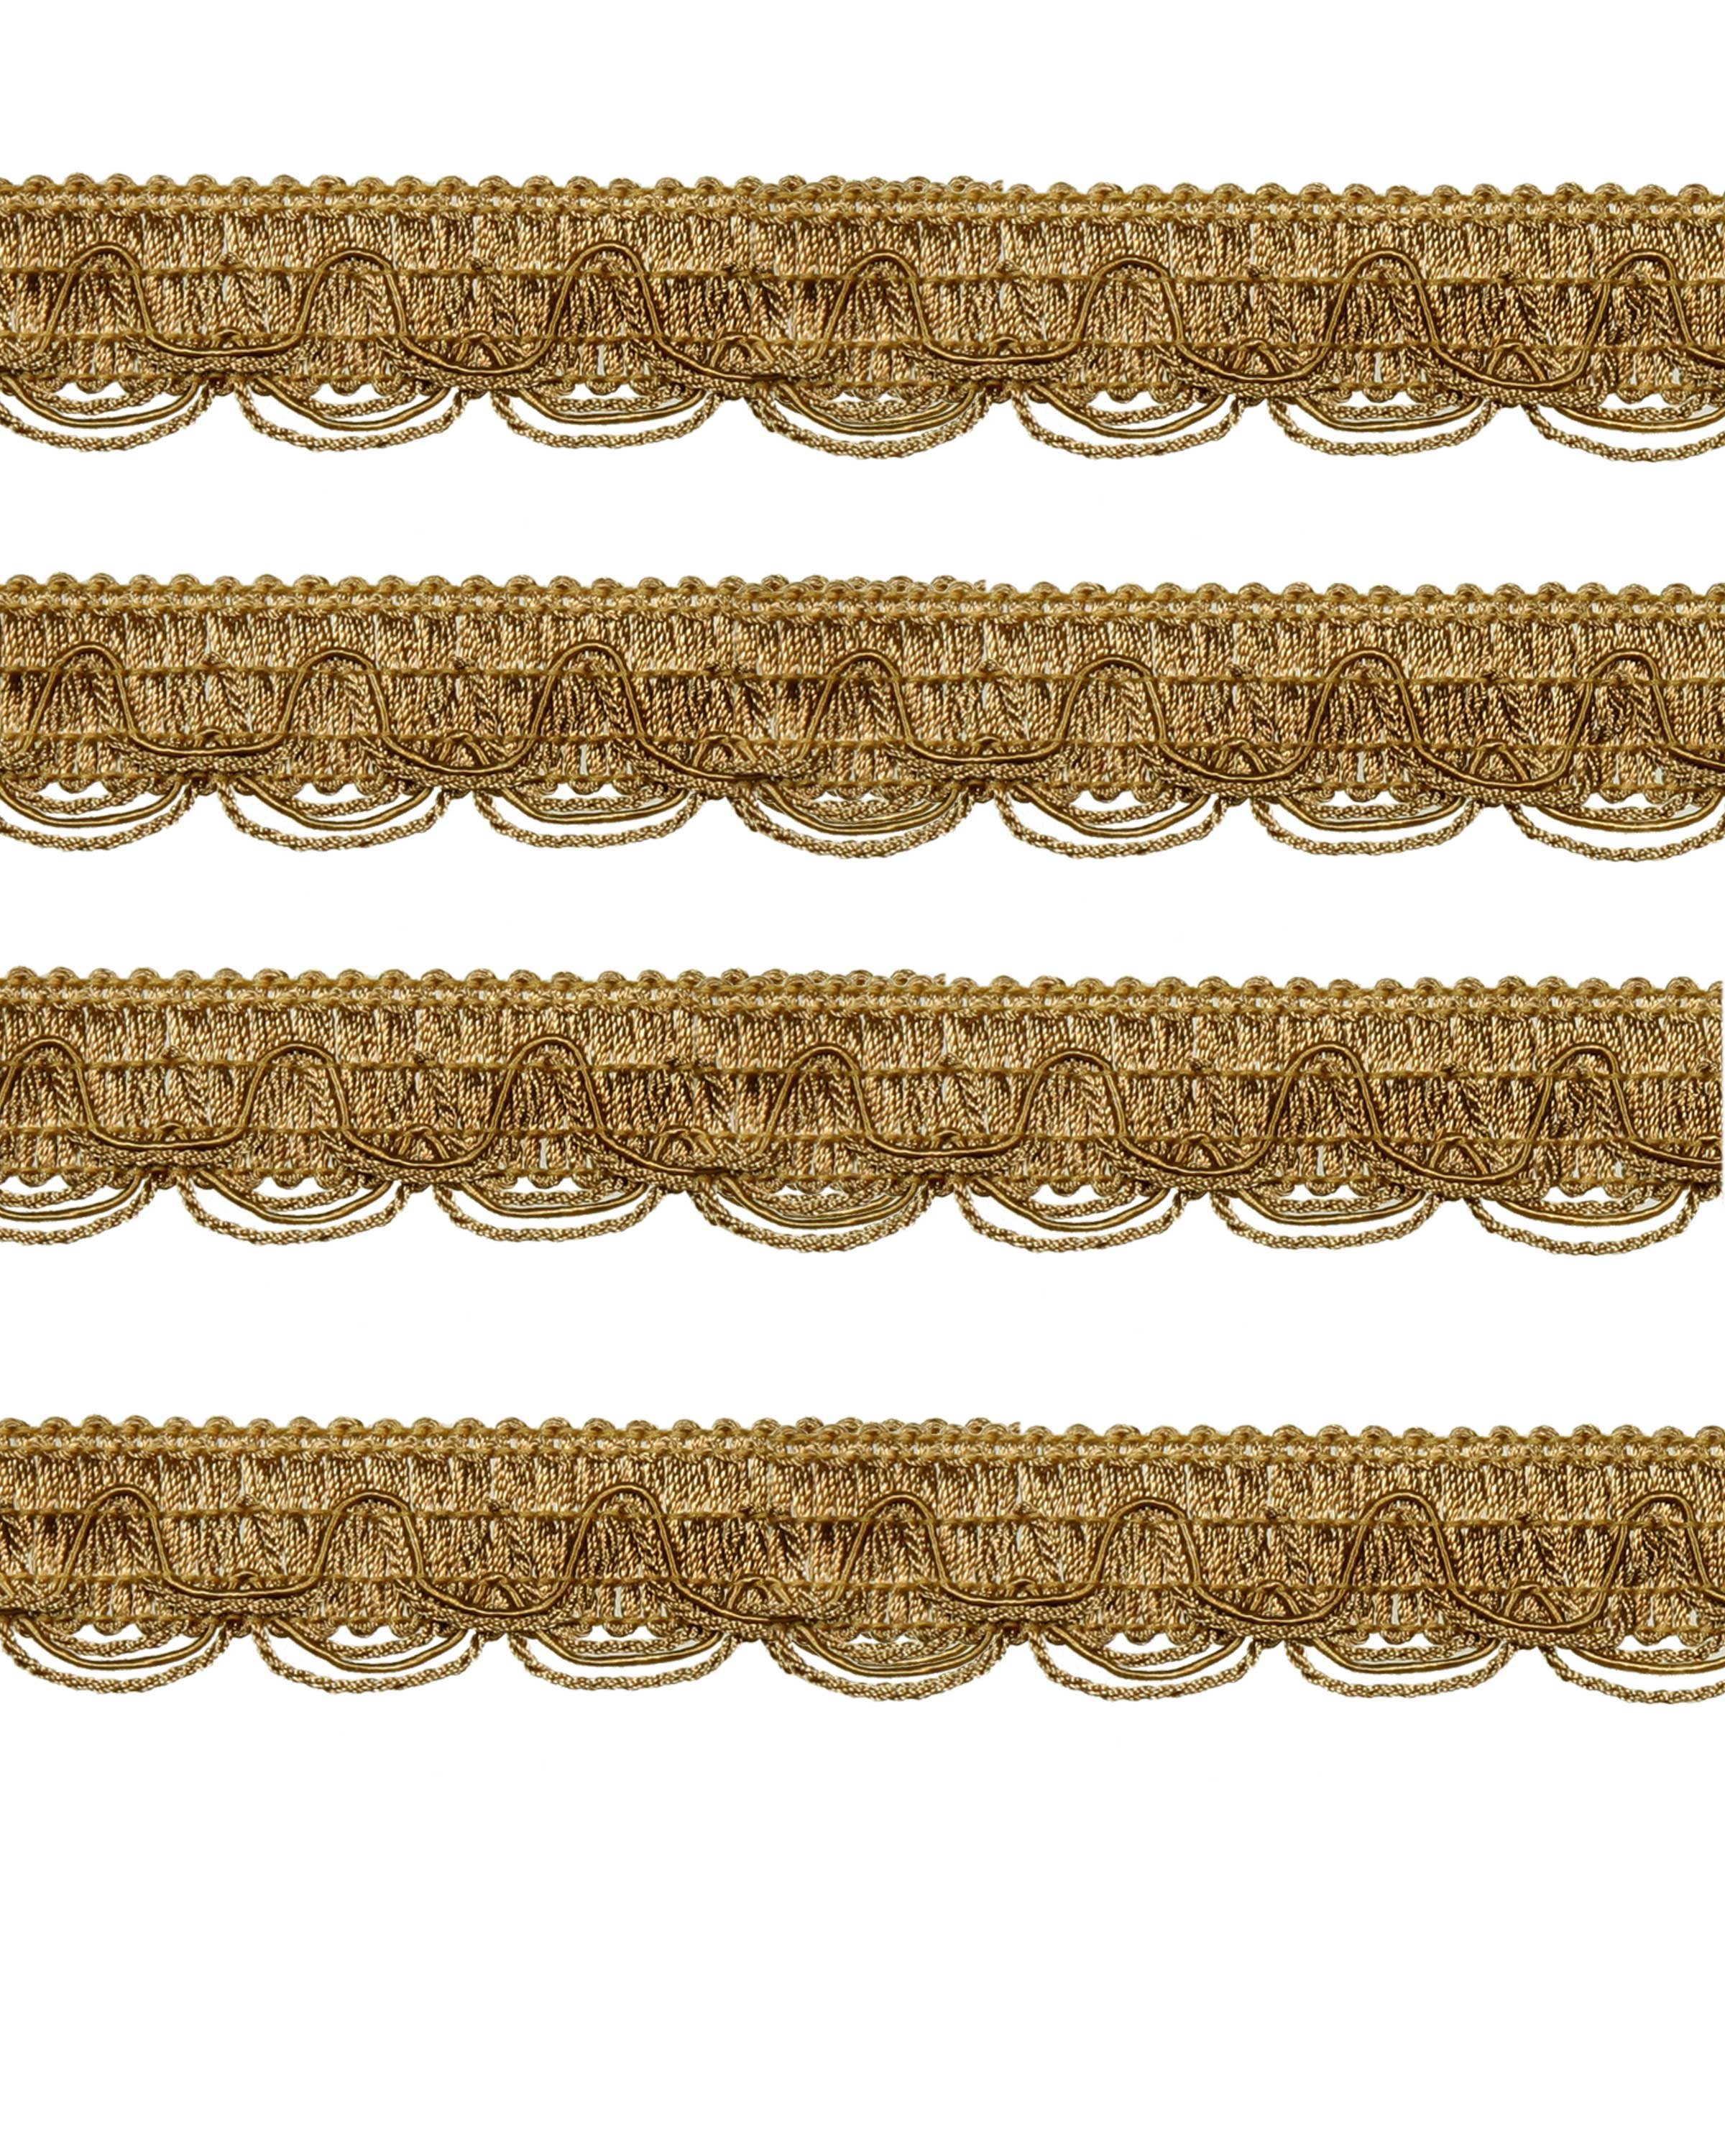 Scalloped Looped Braid - Gold 28mm Price is for 5 metres